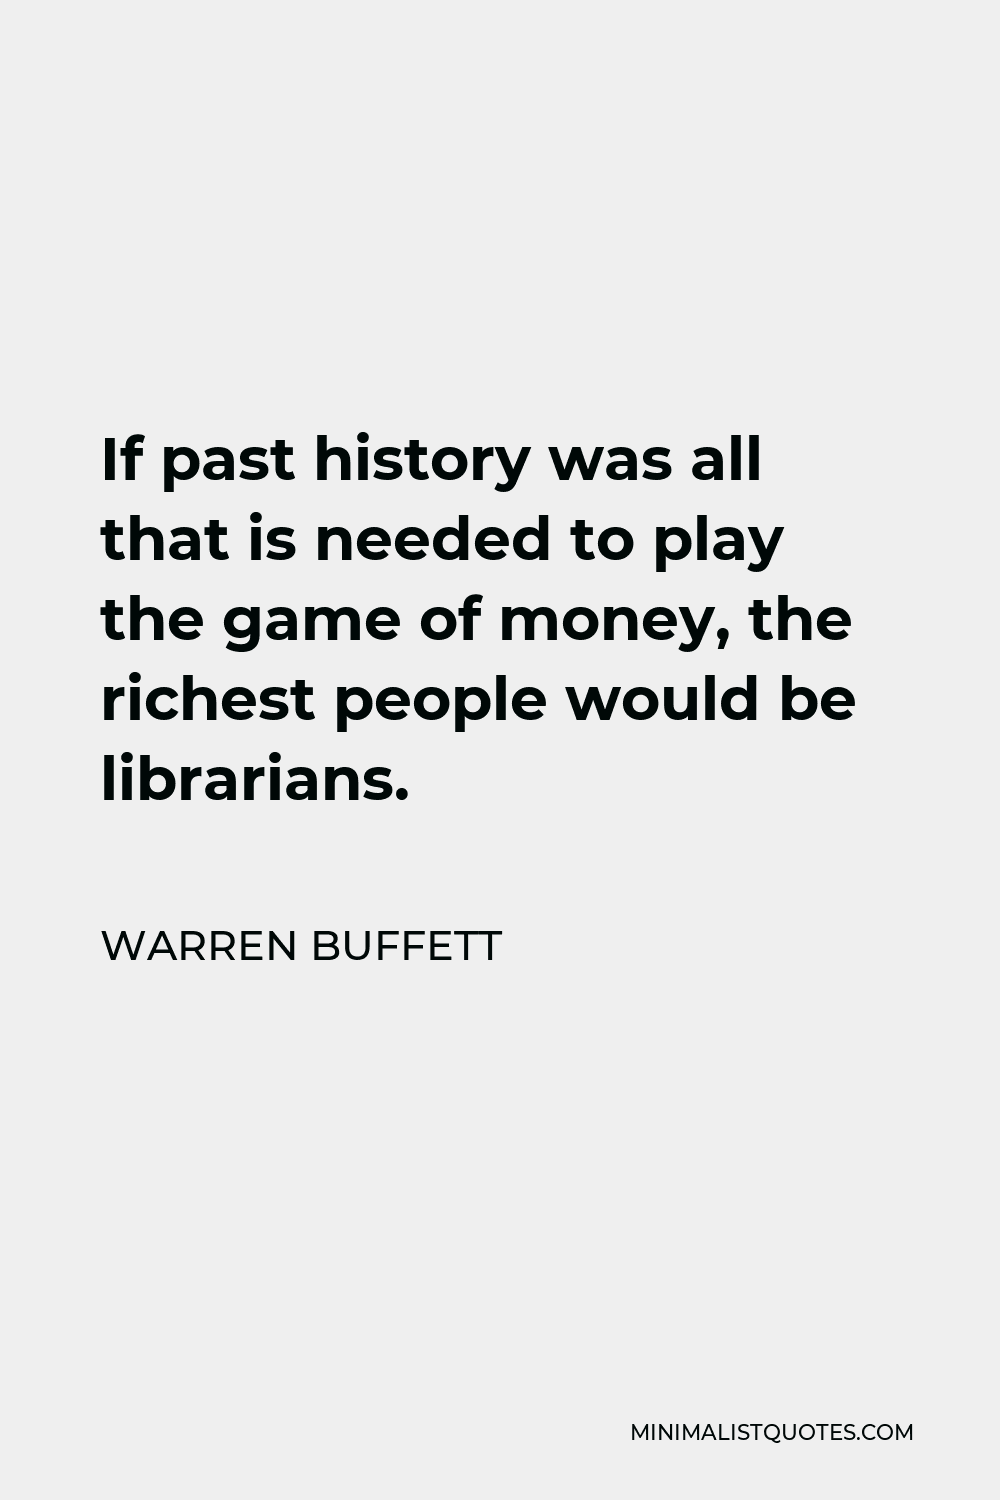 Warren Buffett Quote - If past history was all that is needed to play the game of money, the richest people would be librarians.